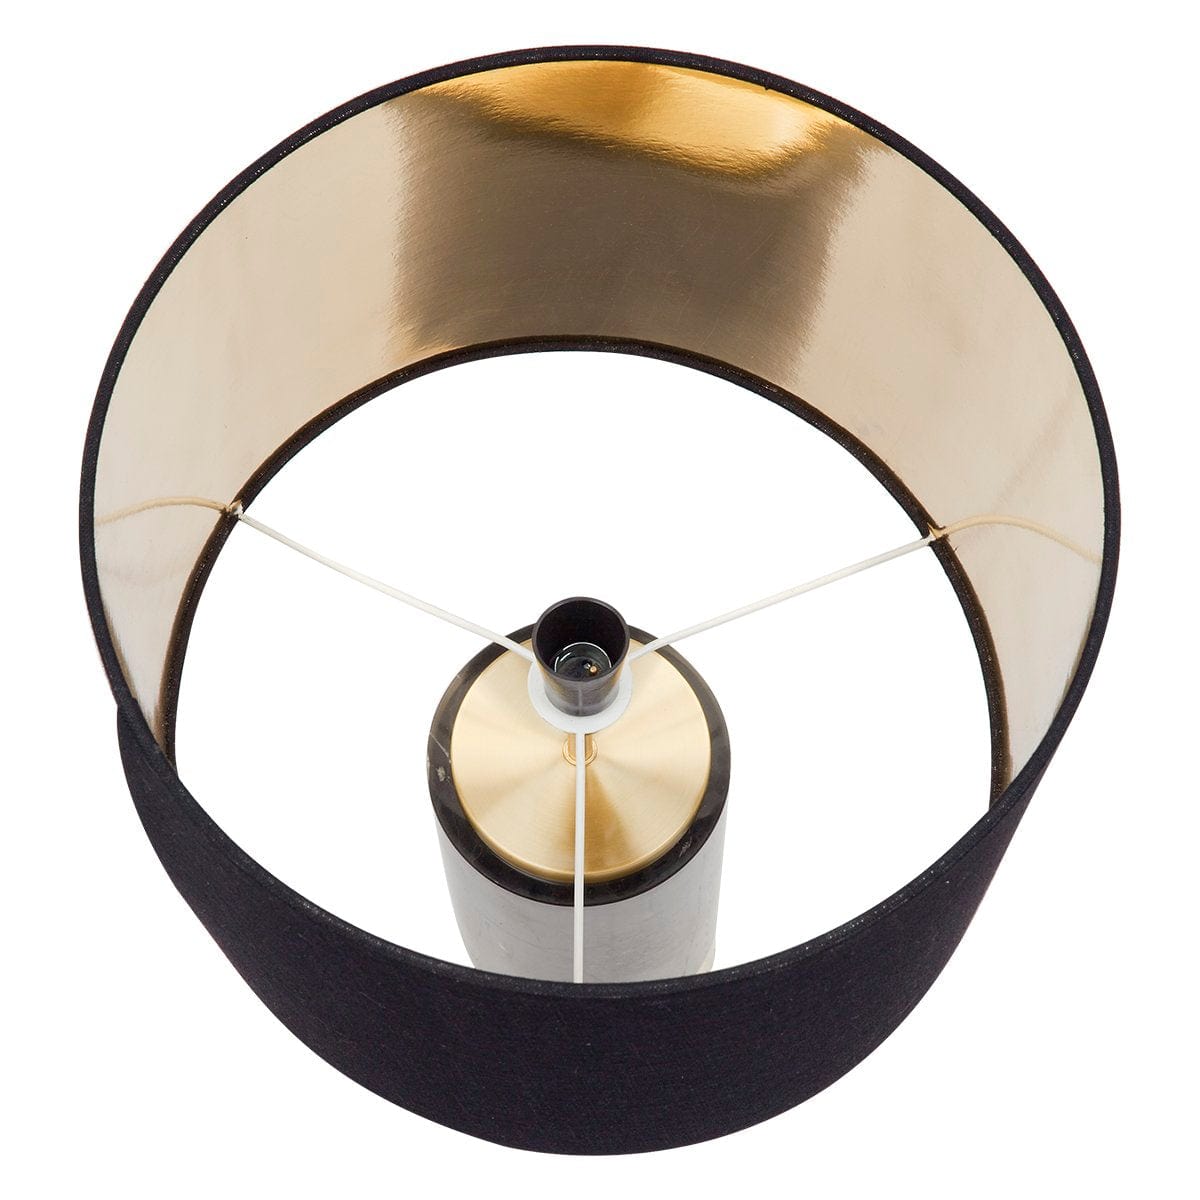 CAFE LIGHTING & LIVING Table Lamp Paola Marble Table Lamp - Black w Black Shade B11651